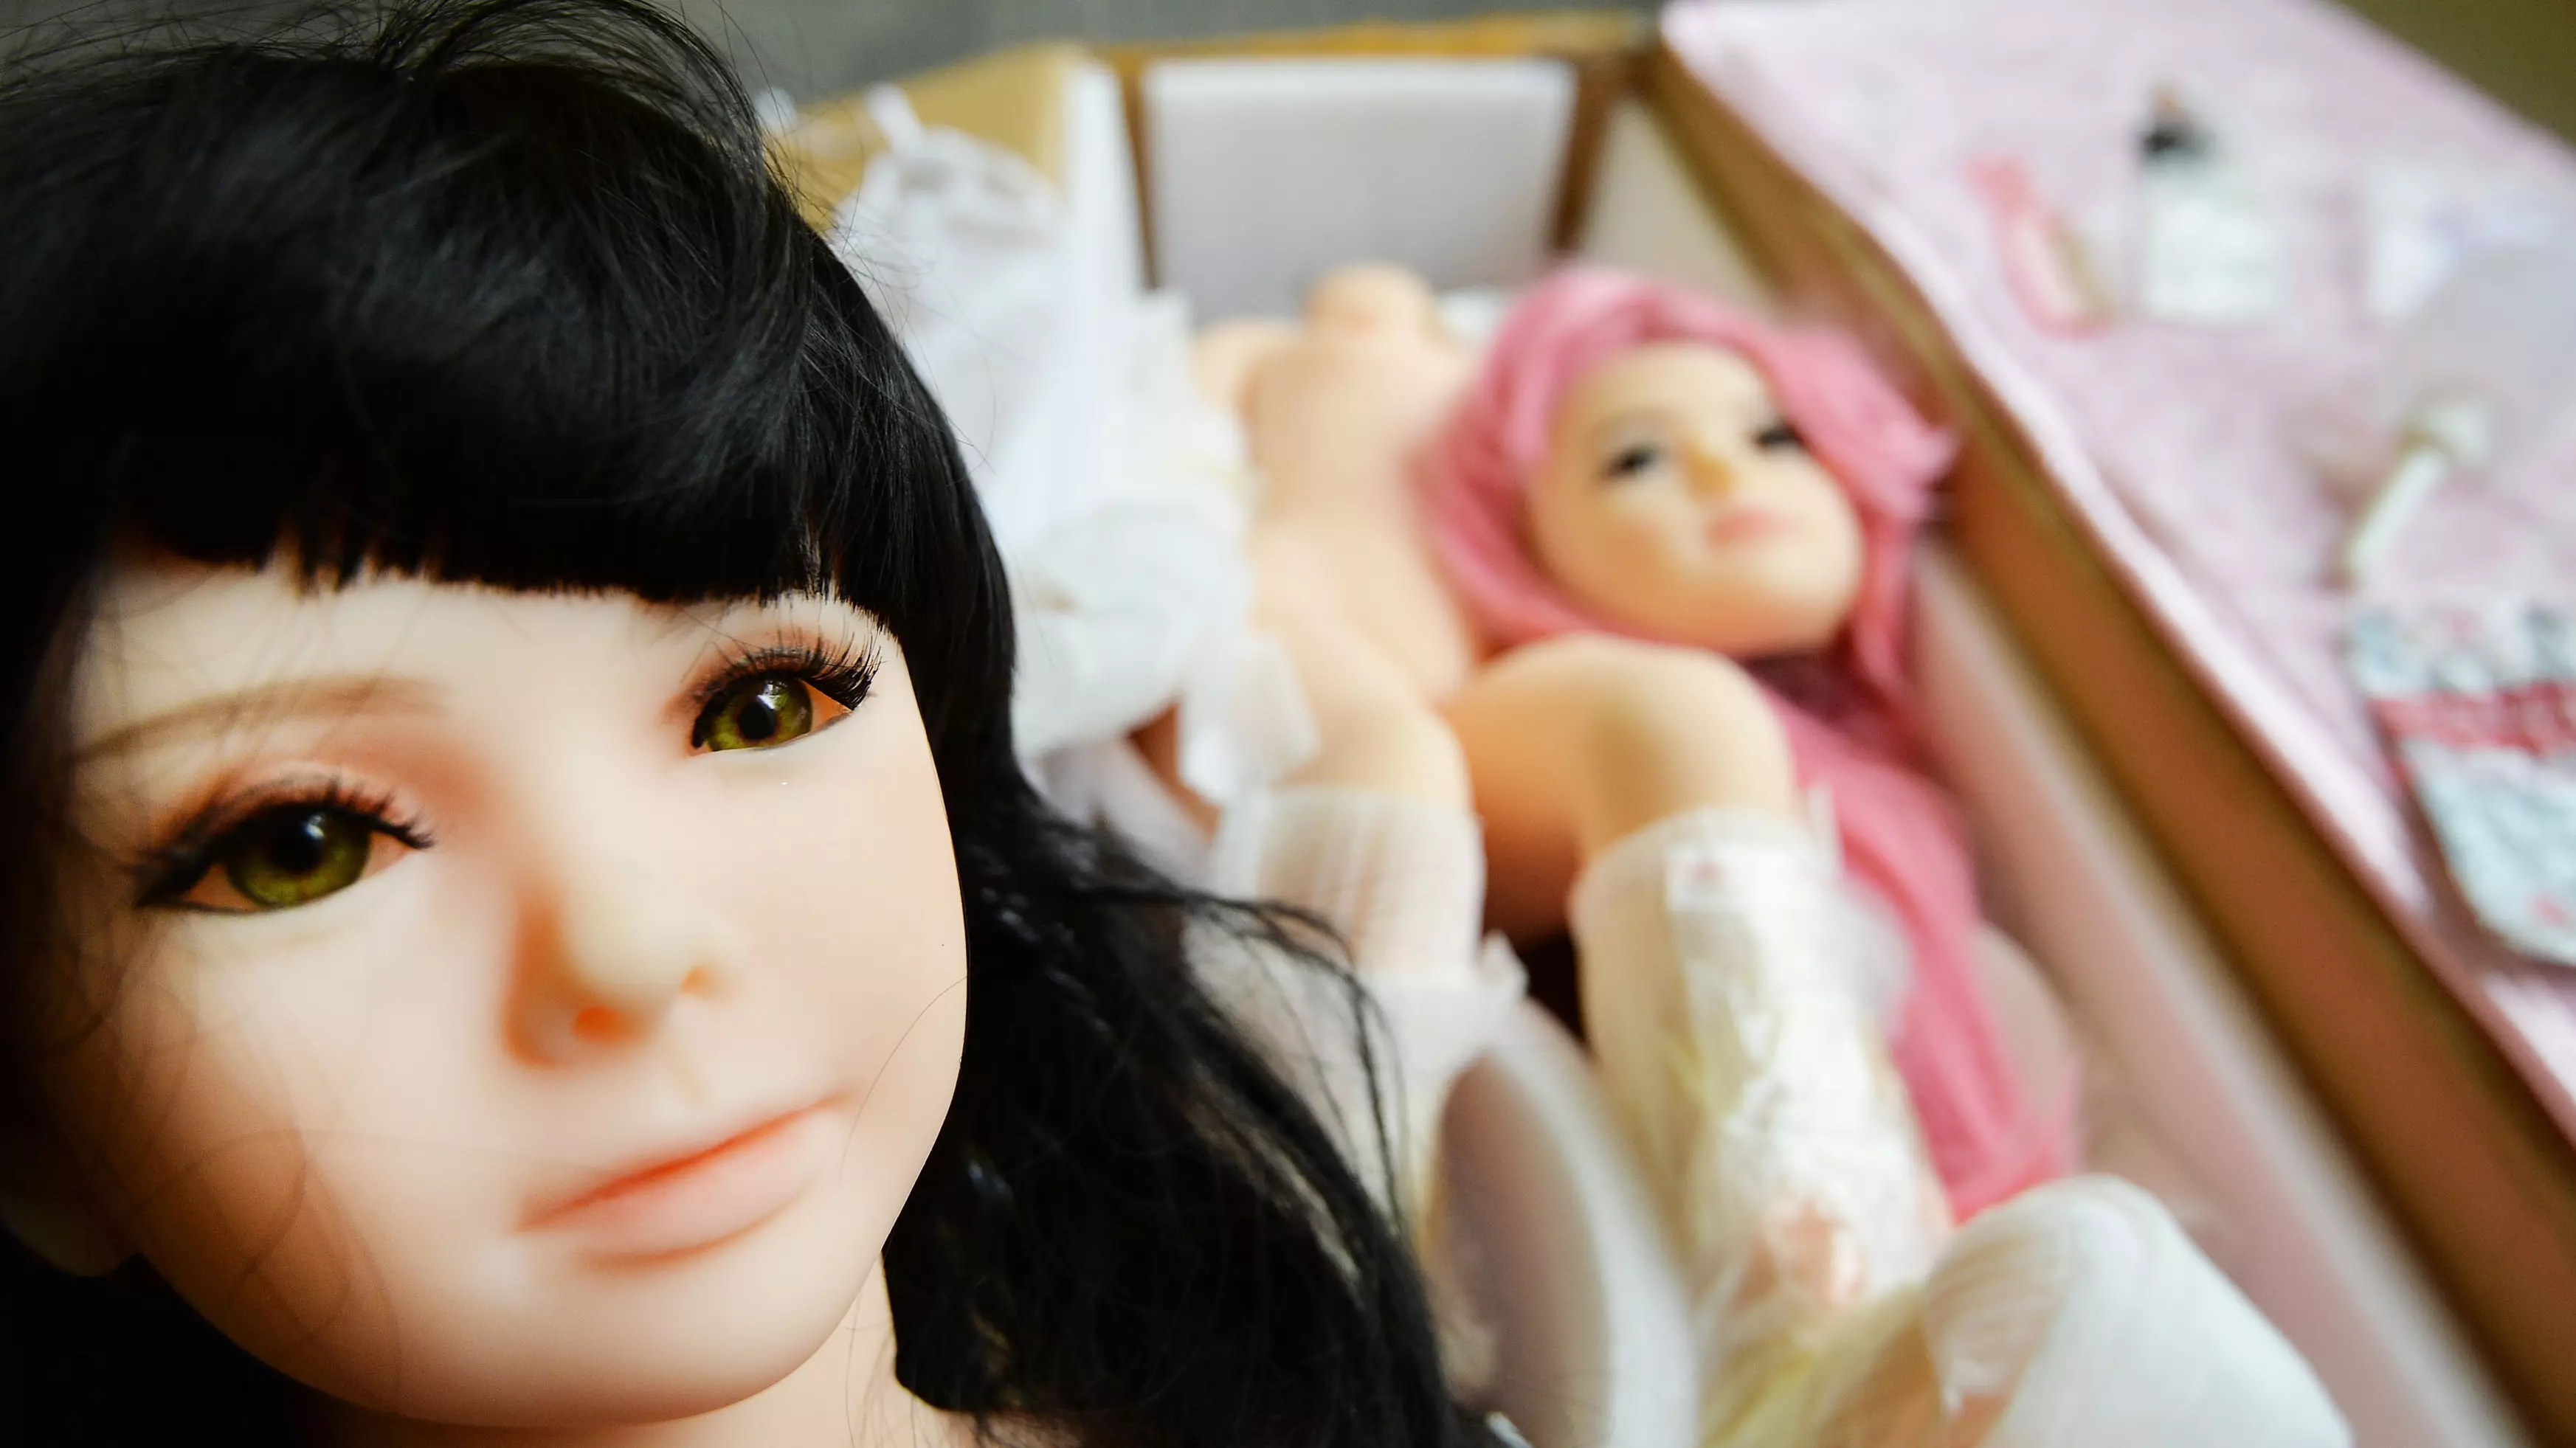 People Caught With Child Sex Dolls Could Soon Be Jailed For Up To 10 Years In South Australia